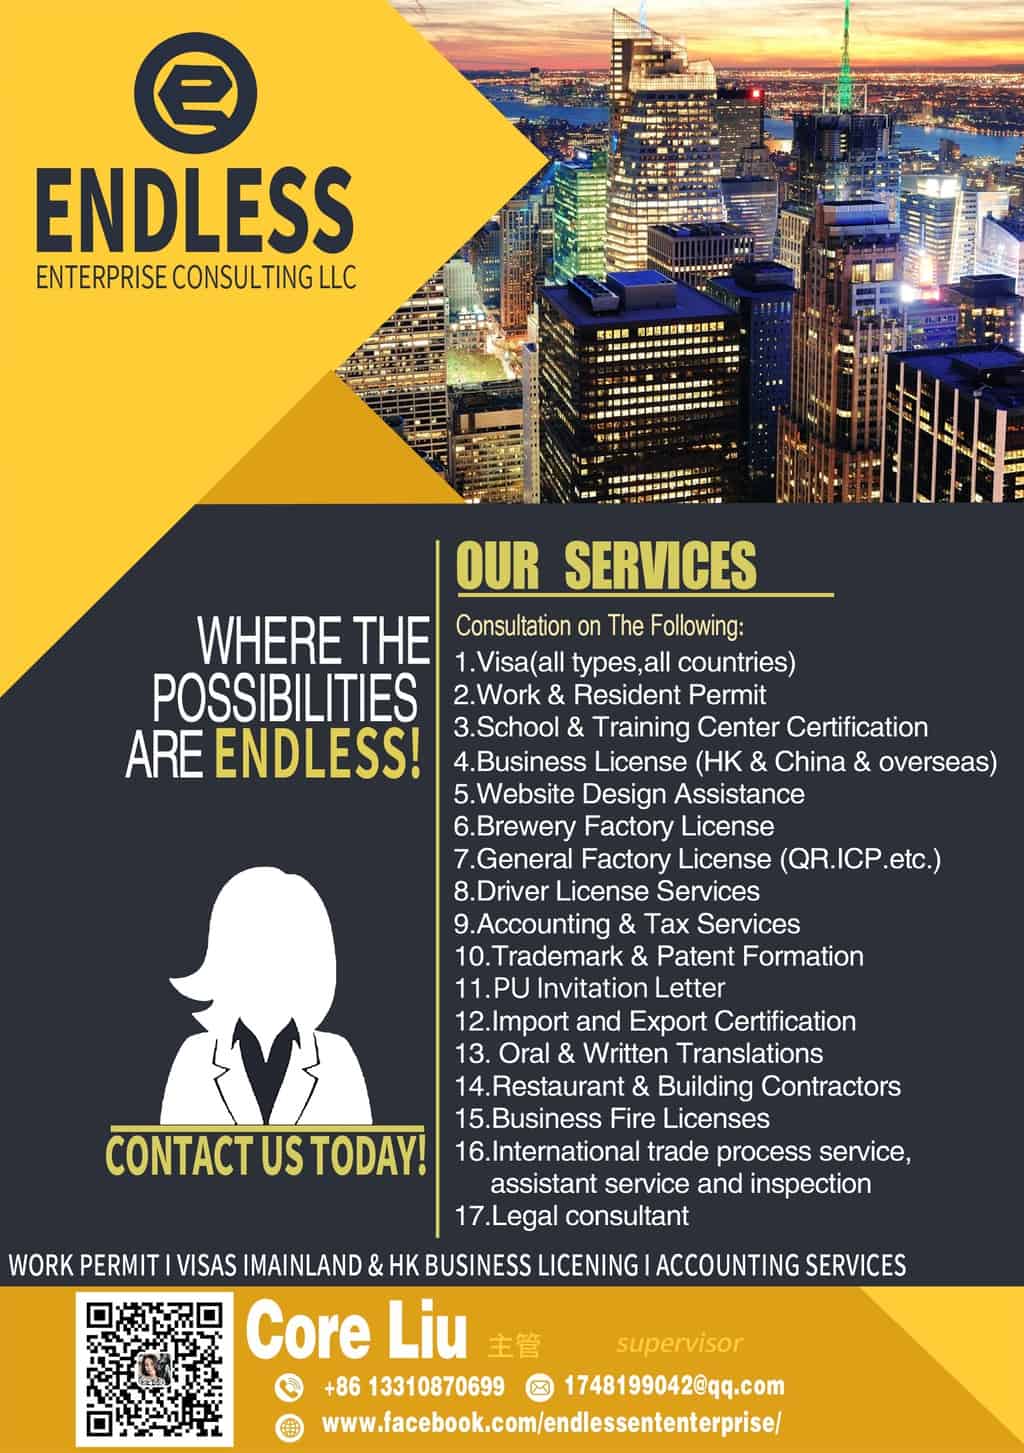 Featured image for “Endless Enterprise Consulting LLC”